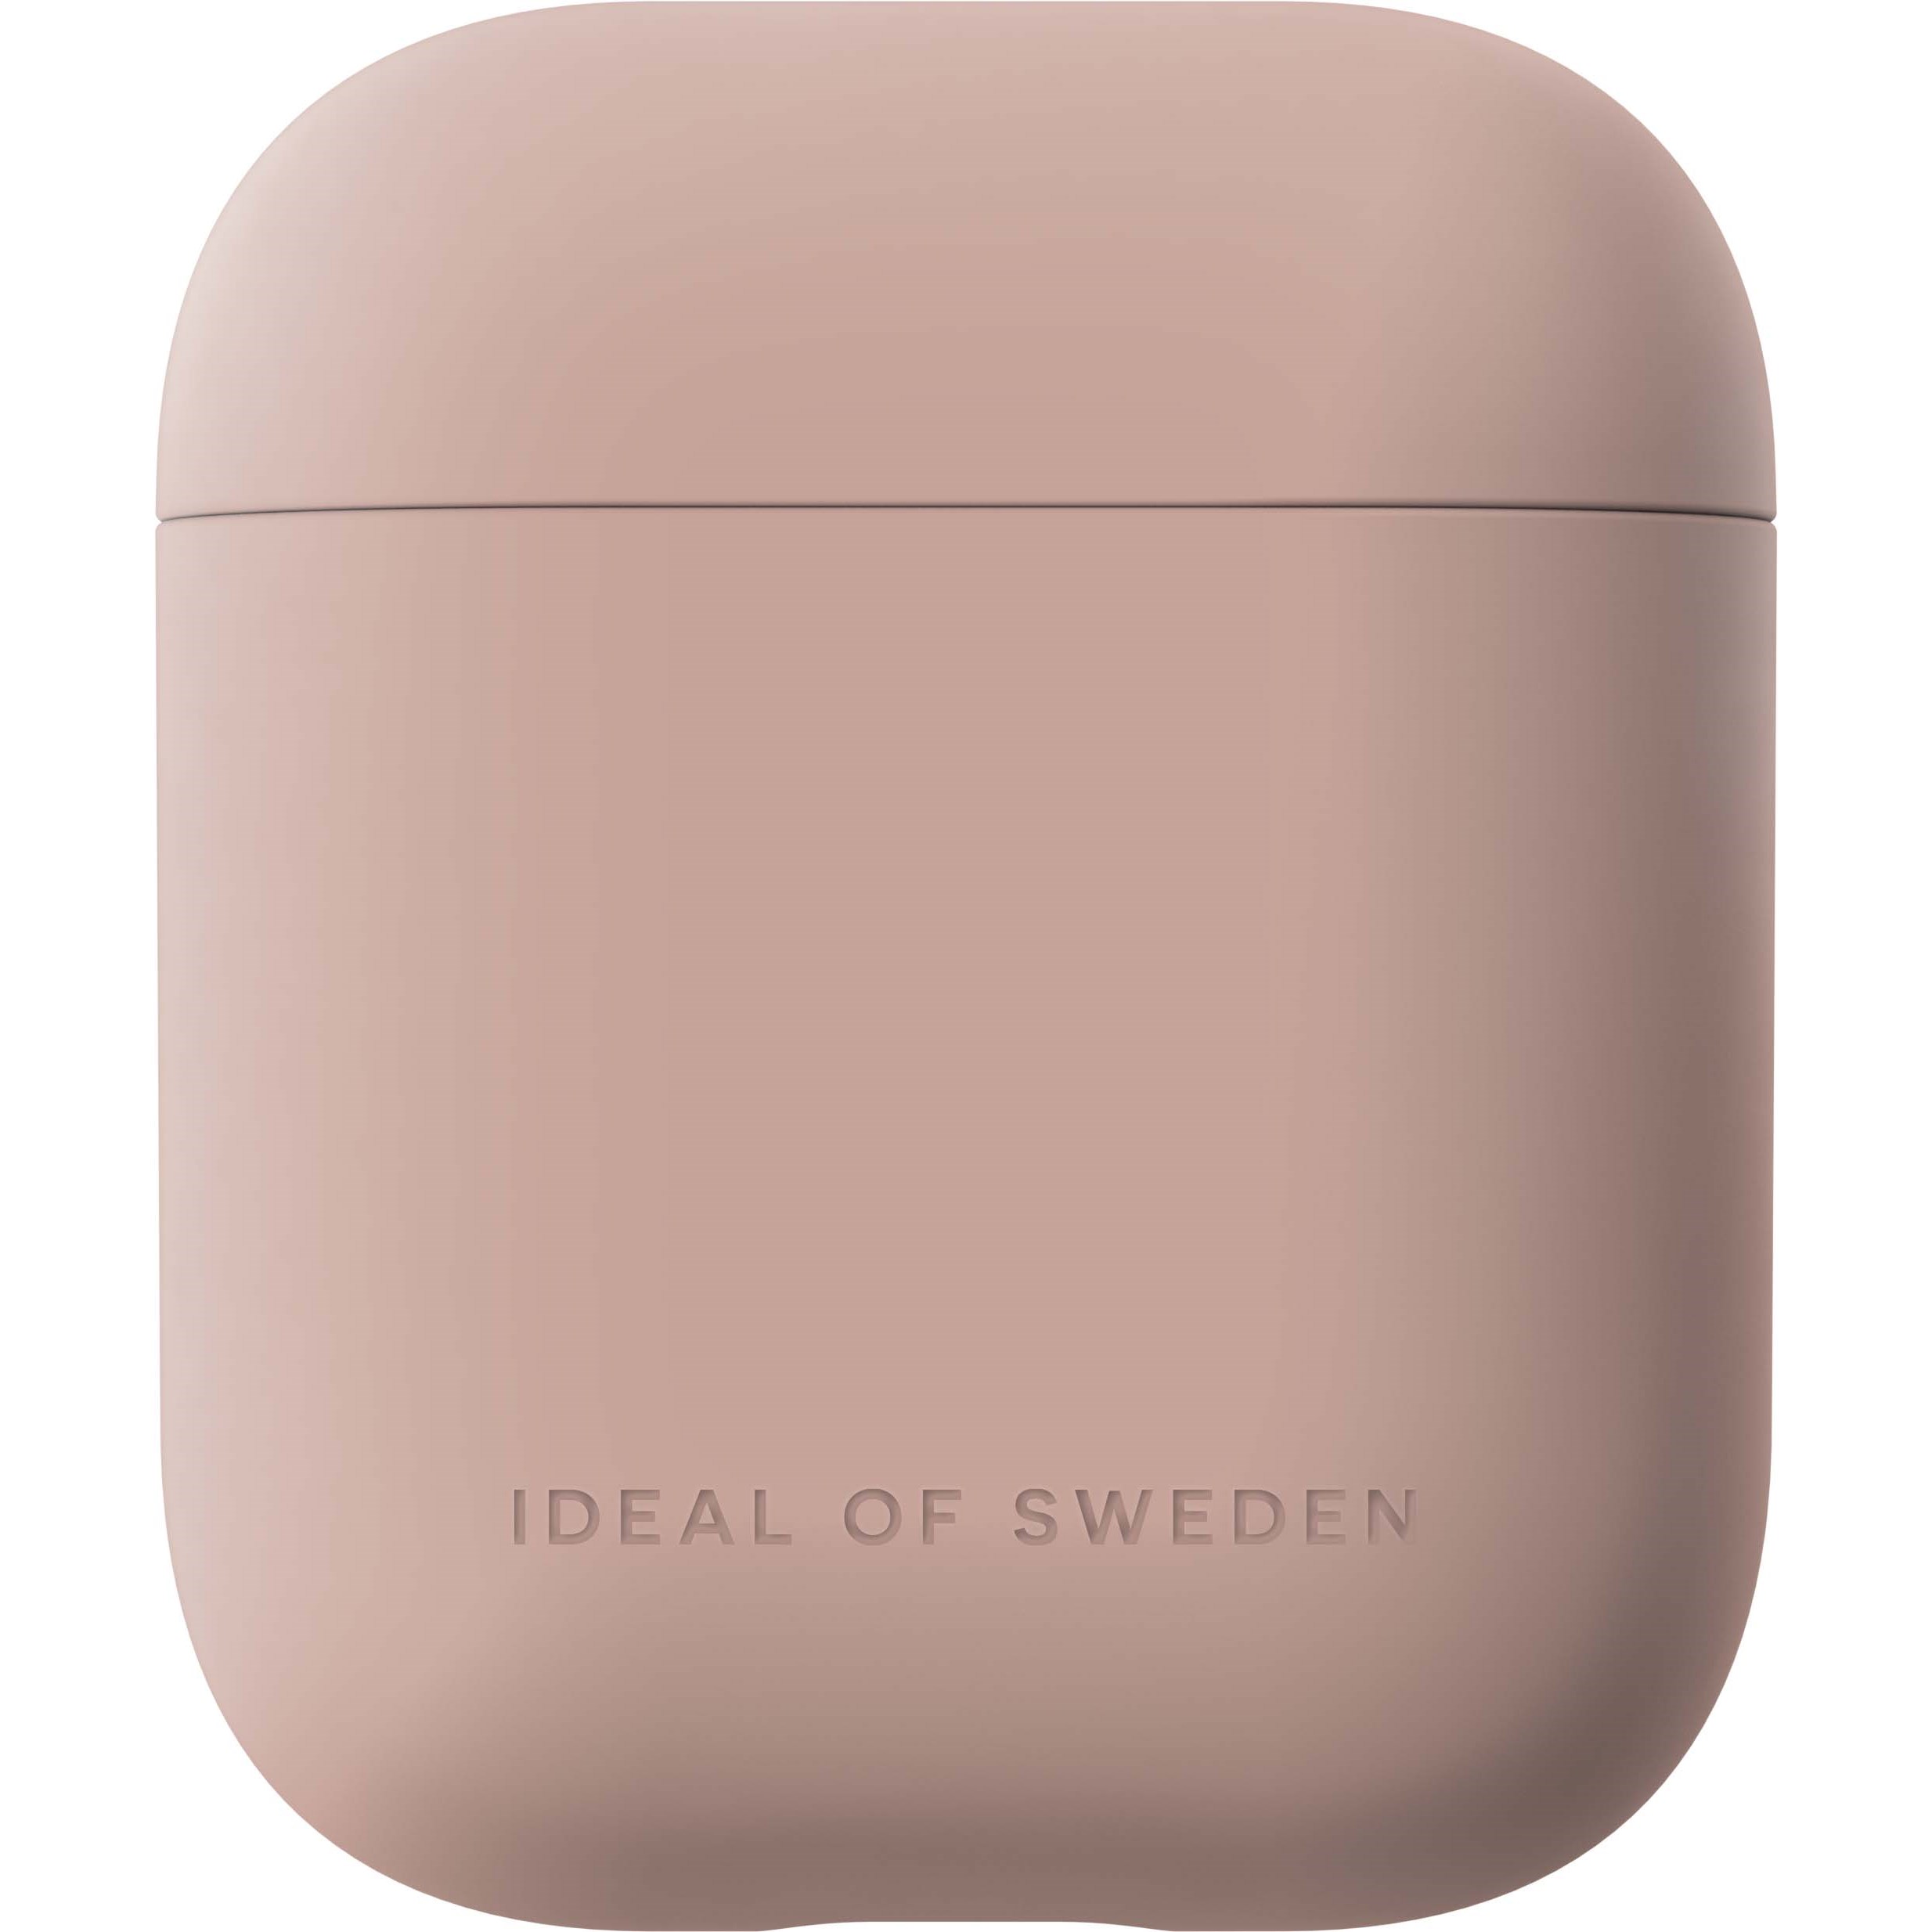 iDeal of Sweden Airpods Gen 1/2 Seamless Airpods Case Pink